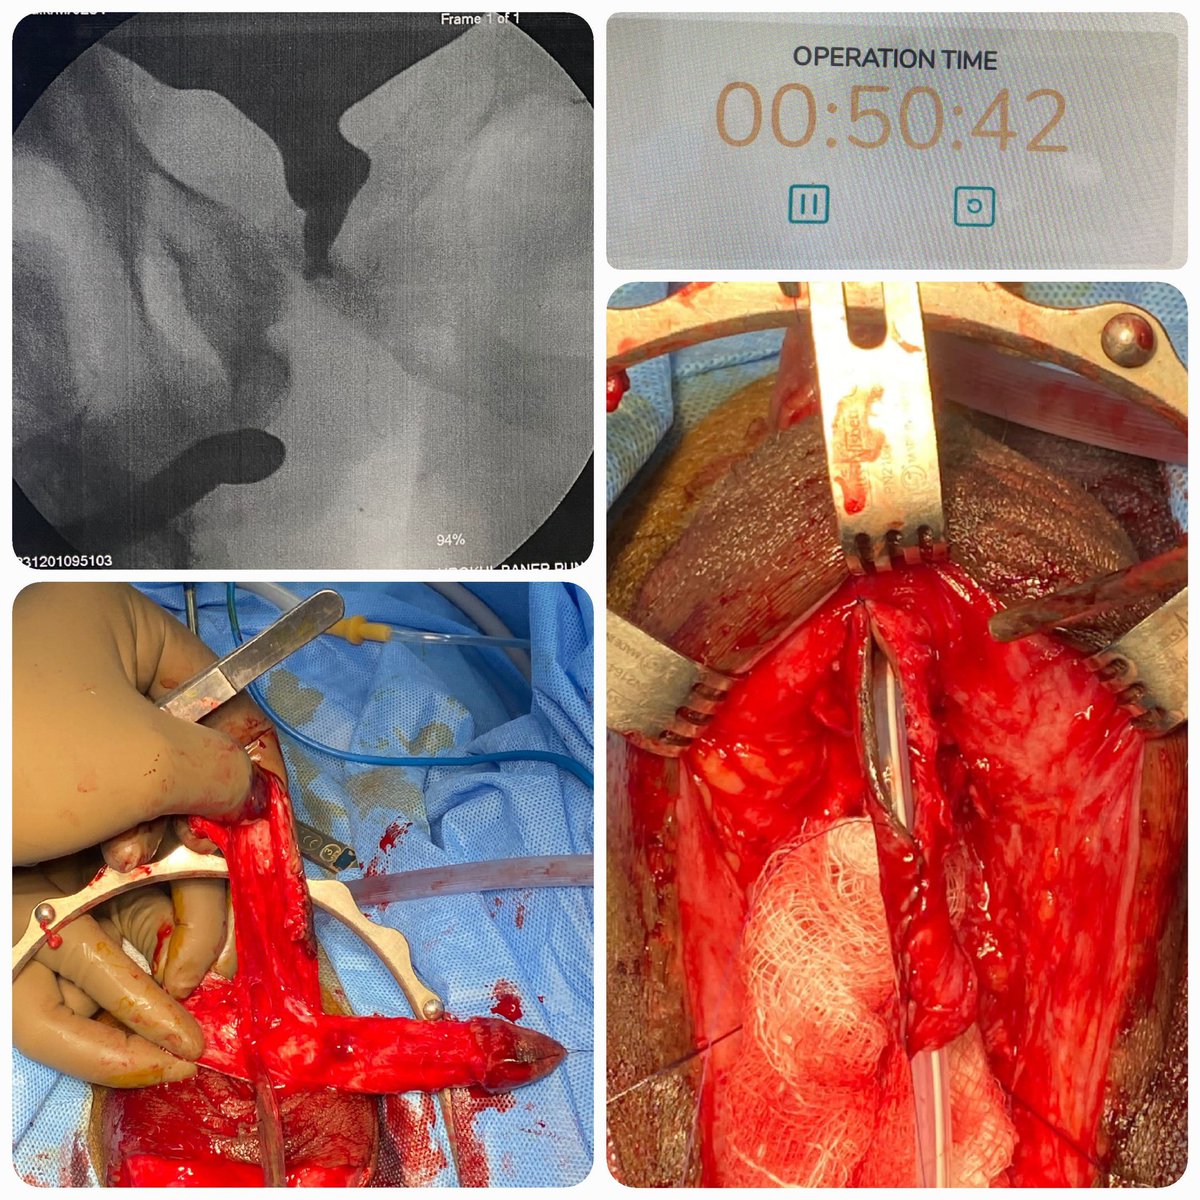 Week of complex cases in #Urokul. 3 cases of #bulbarnecrosis. Required pedicle preputial flap. Operation time: 50 minutes (all cases with inferior pubectomy) by @drjoshi_pankaj